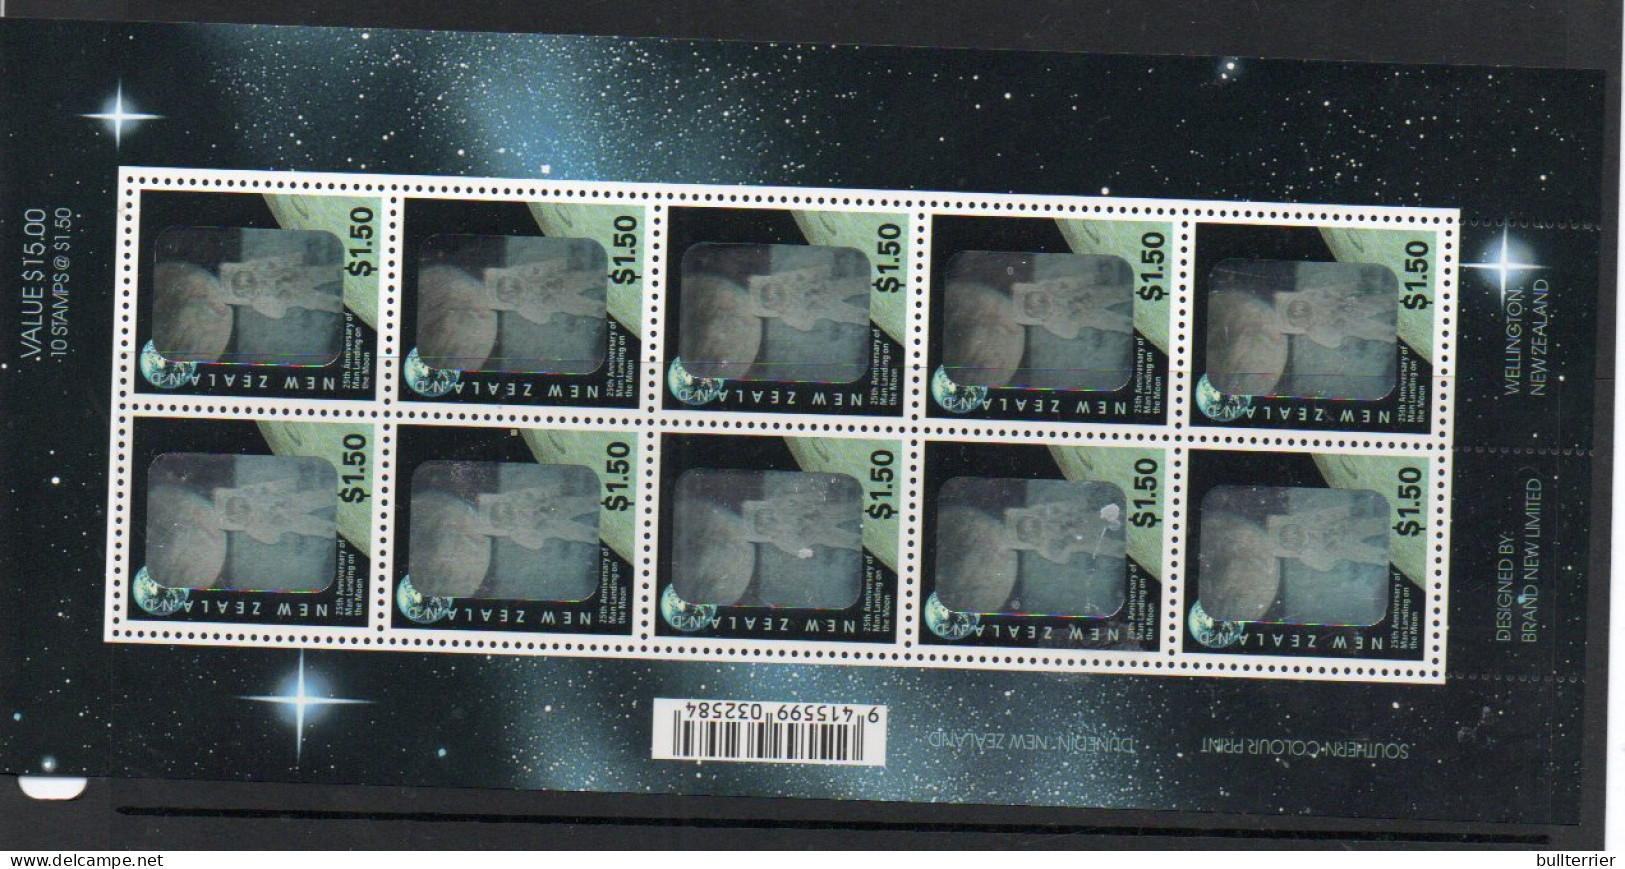 HOLOGRAMS - NEW ZEALAND - 1994- MAN ON MOON £1.50 SHEETLET OF 10  MINT NEVER HINGED, SG CAT £22.50 - Ologrammi